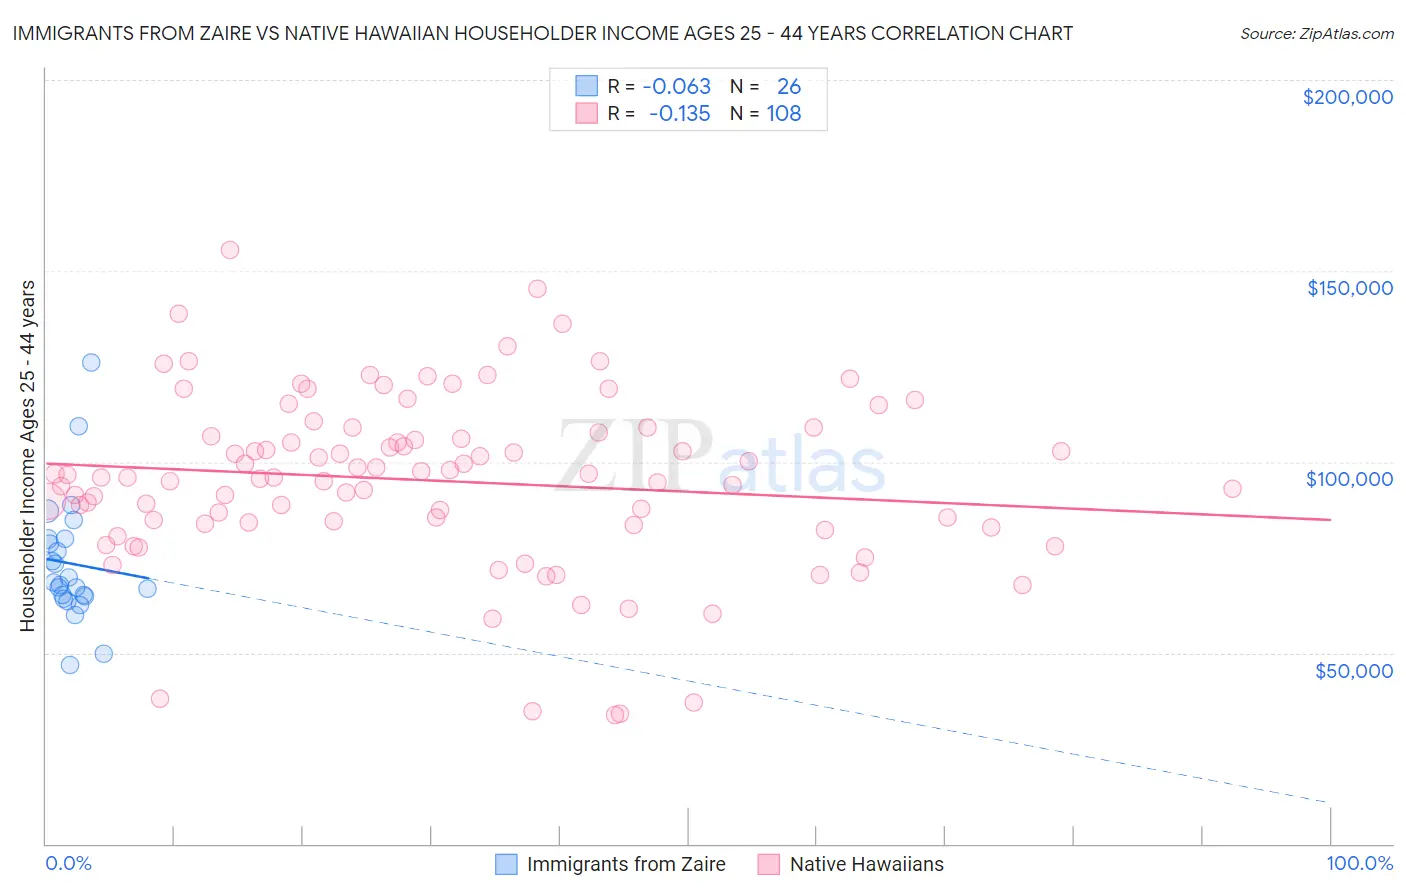 Immigrants from Zaire vs Native Hawaiian Householder Income Ages 25 - 44 years